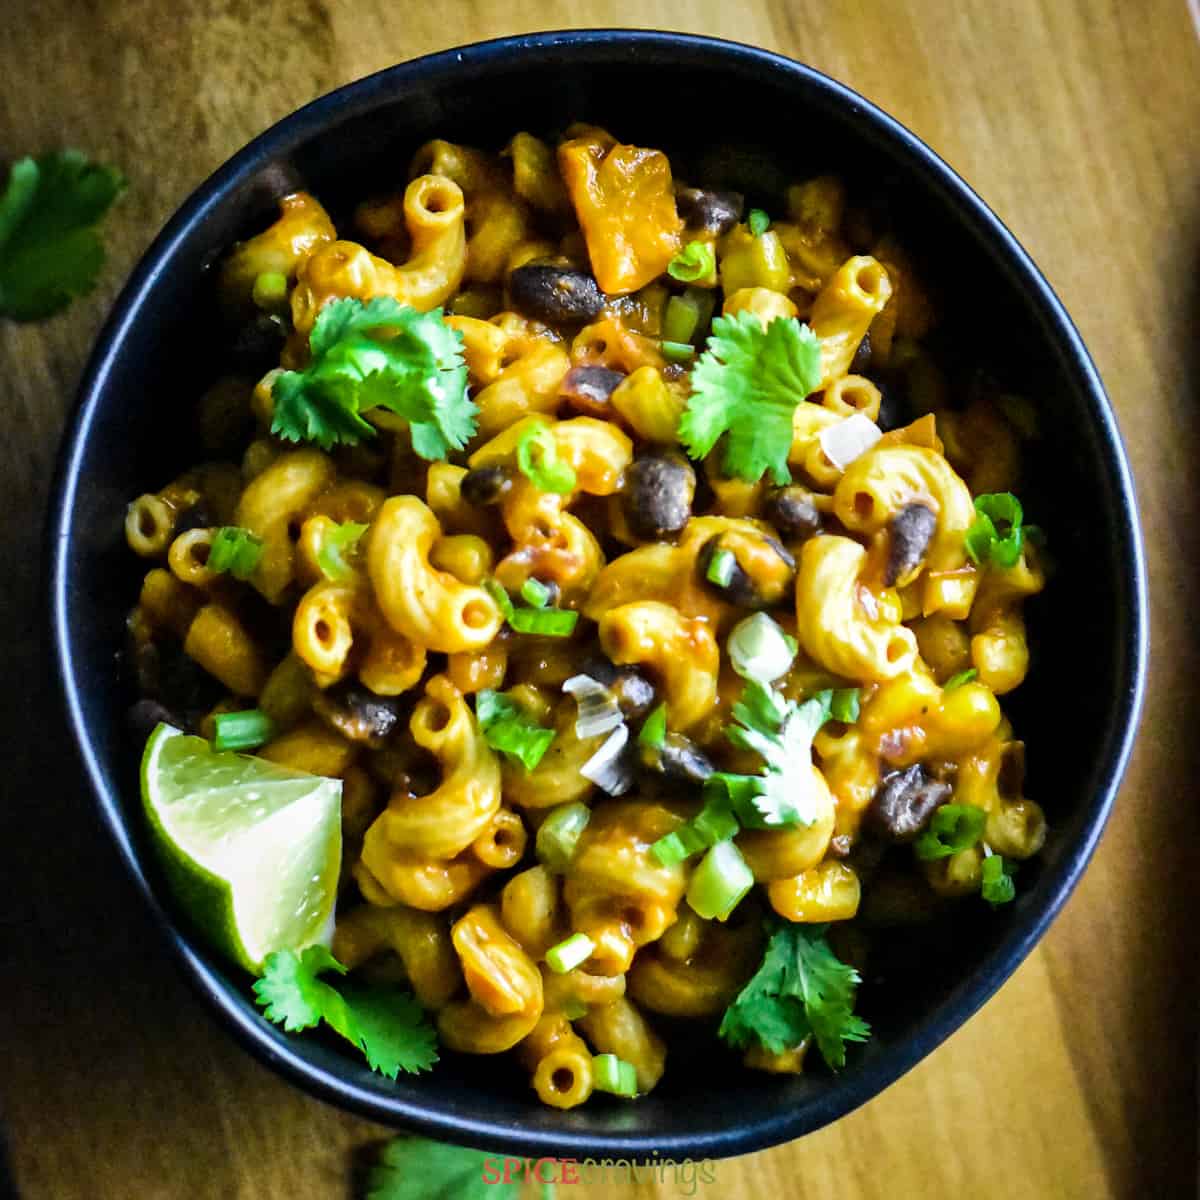 Step by Step instructions on how to make Vegetarian Taco Pasta in an Instant Pot